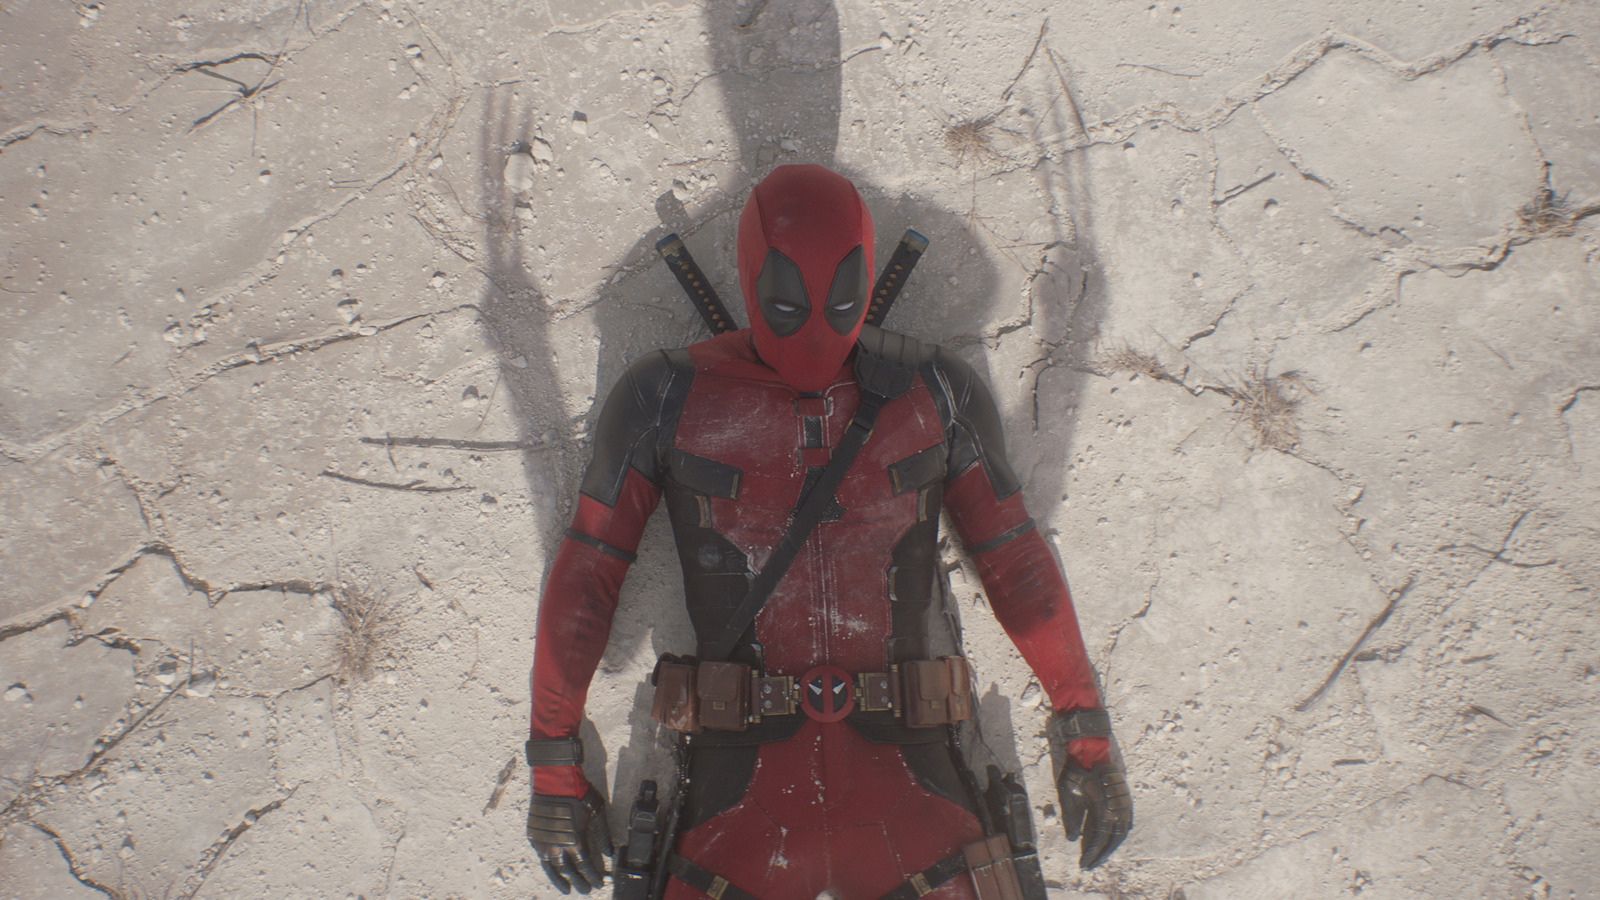 The Deadpool & Wolverine Trailer Just Smashed An Impressive Record